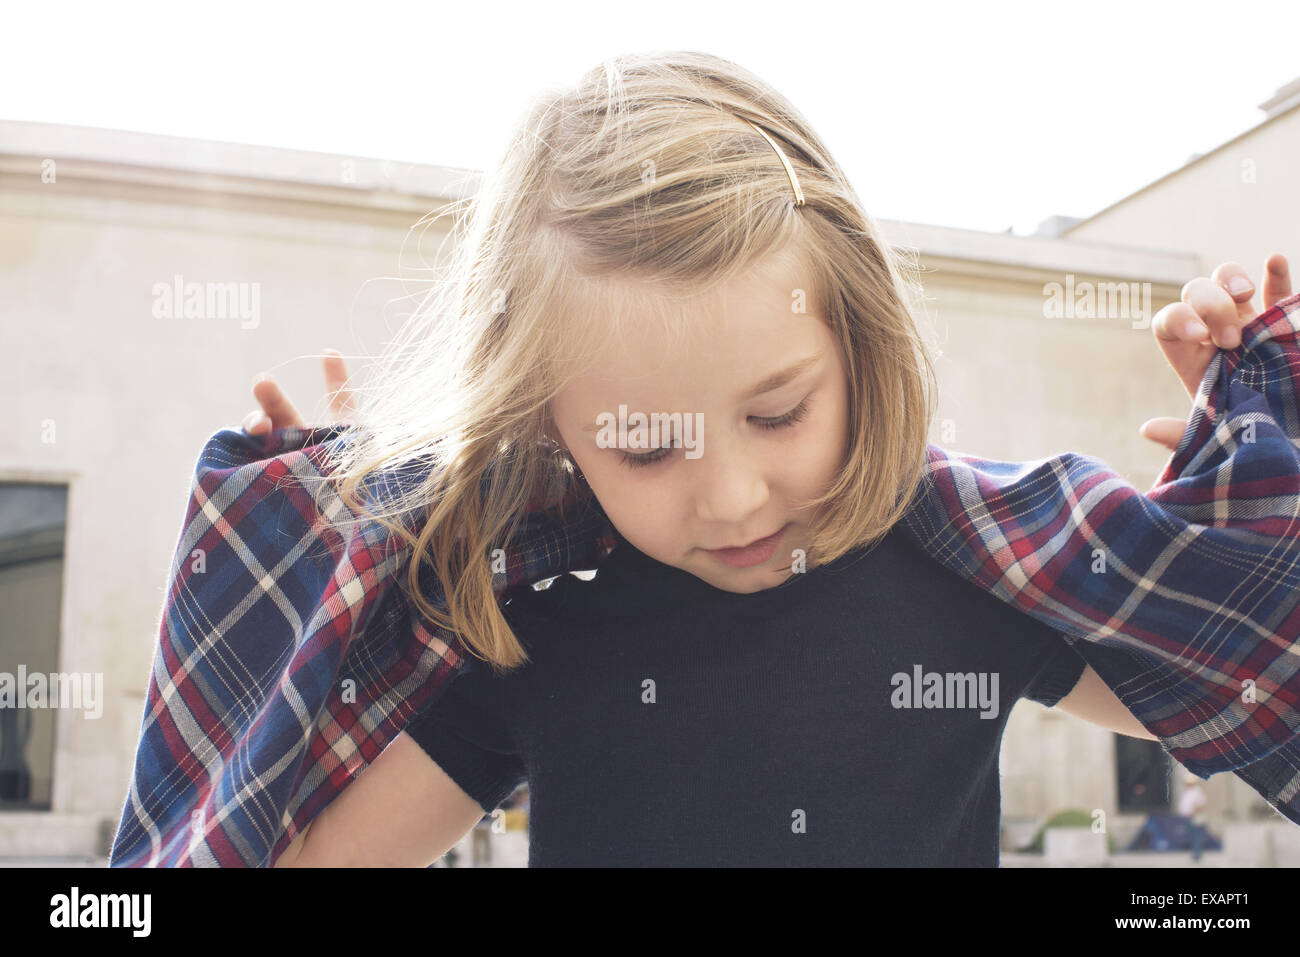 Little girl playing outdoors Stock Photo